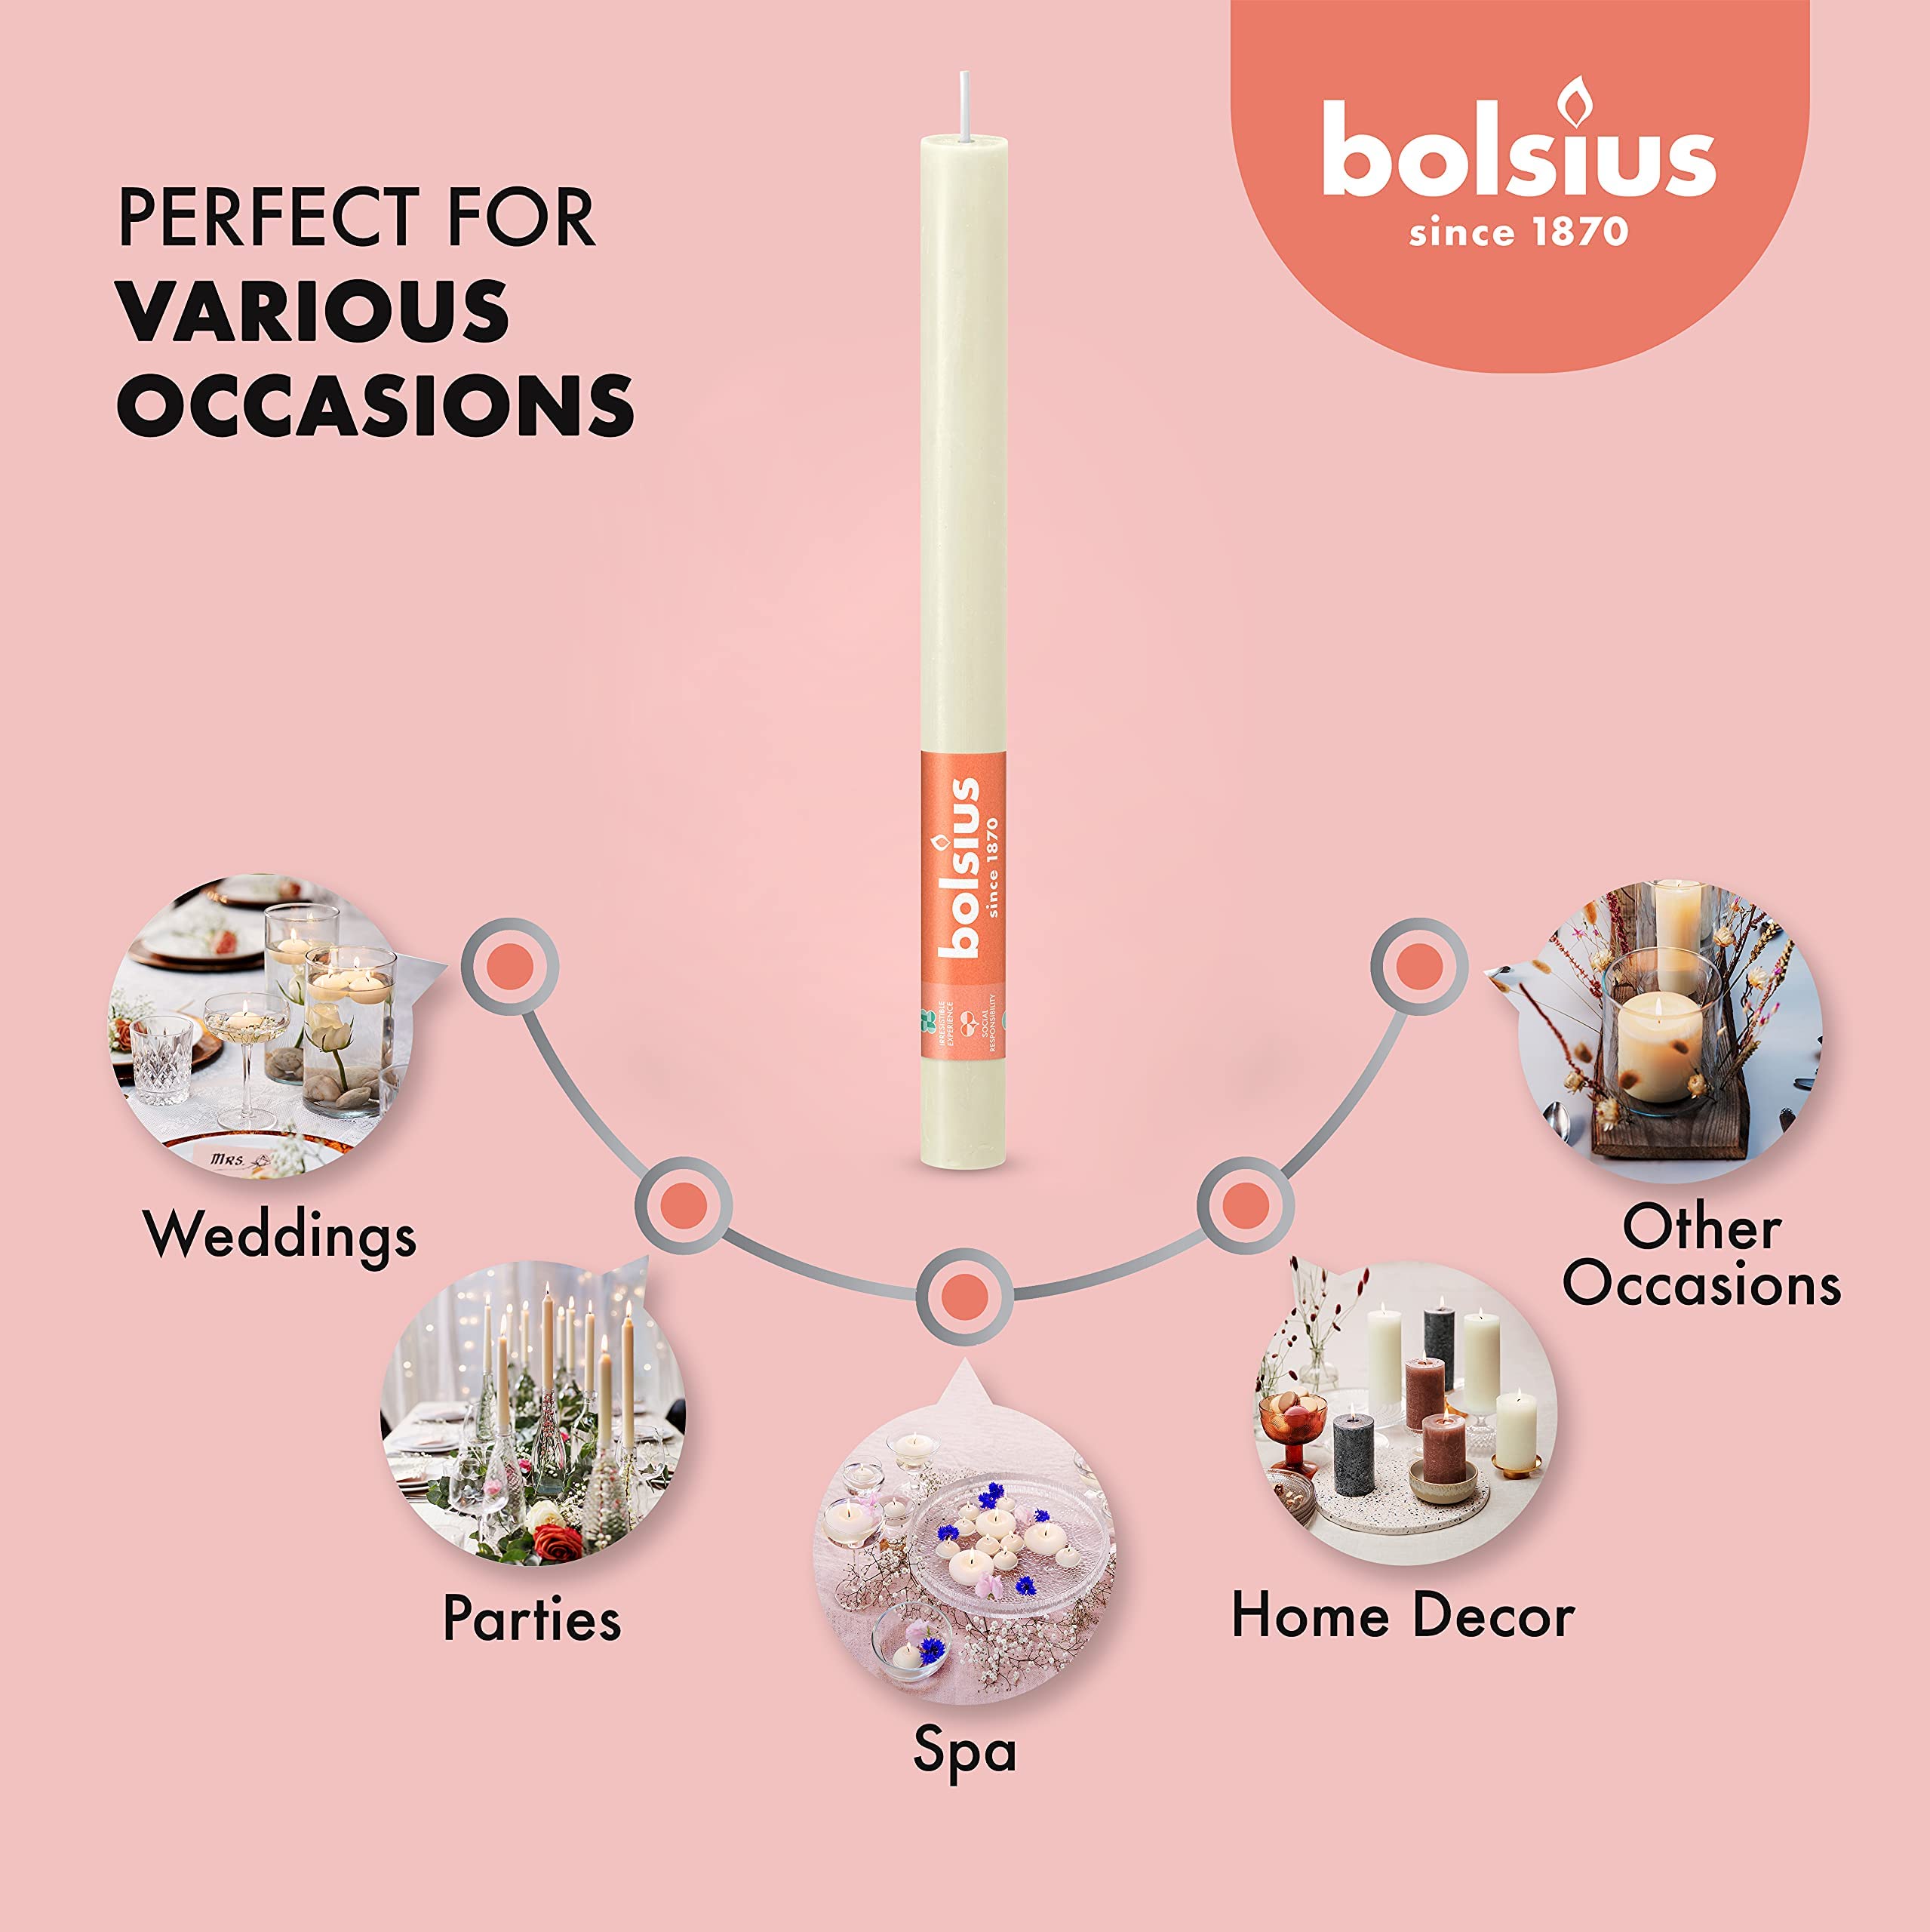 BOLSIUS 16 Pack - Premium European Quality - 13 Hour Burn Time - Natural Eco-Friendly Plant-Based Wax - Unscented Dripless Smokeless Party Décor Candles  - Like New